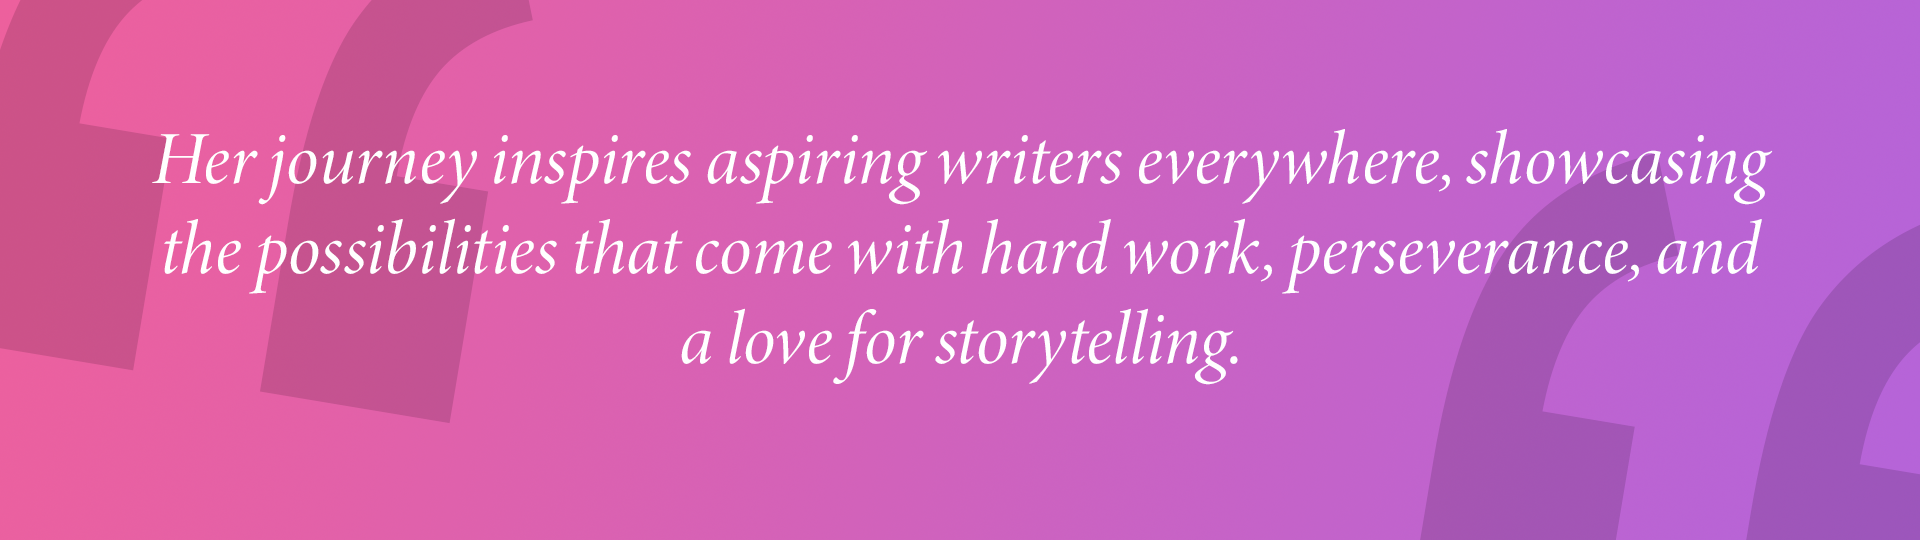 Her journey inspires aspiring writers everywhere, showcasing the possibilities that come with hard work, perseverance, and a love for storytelling.